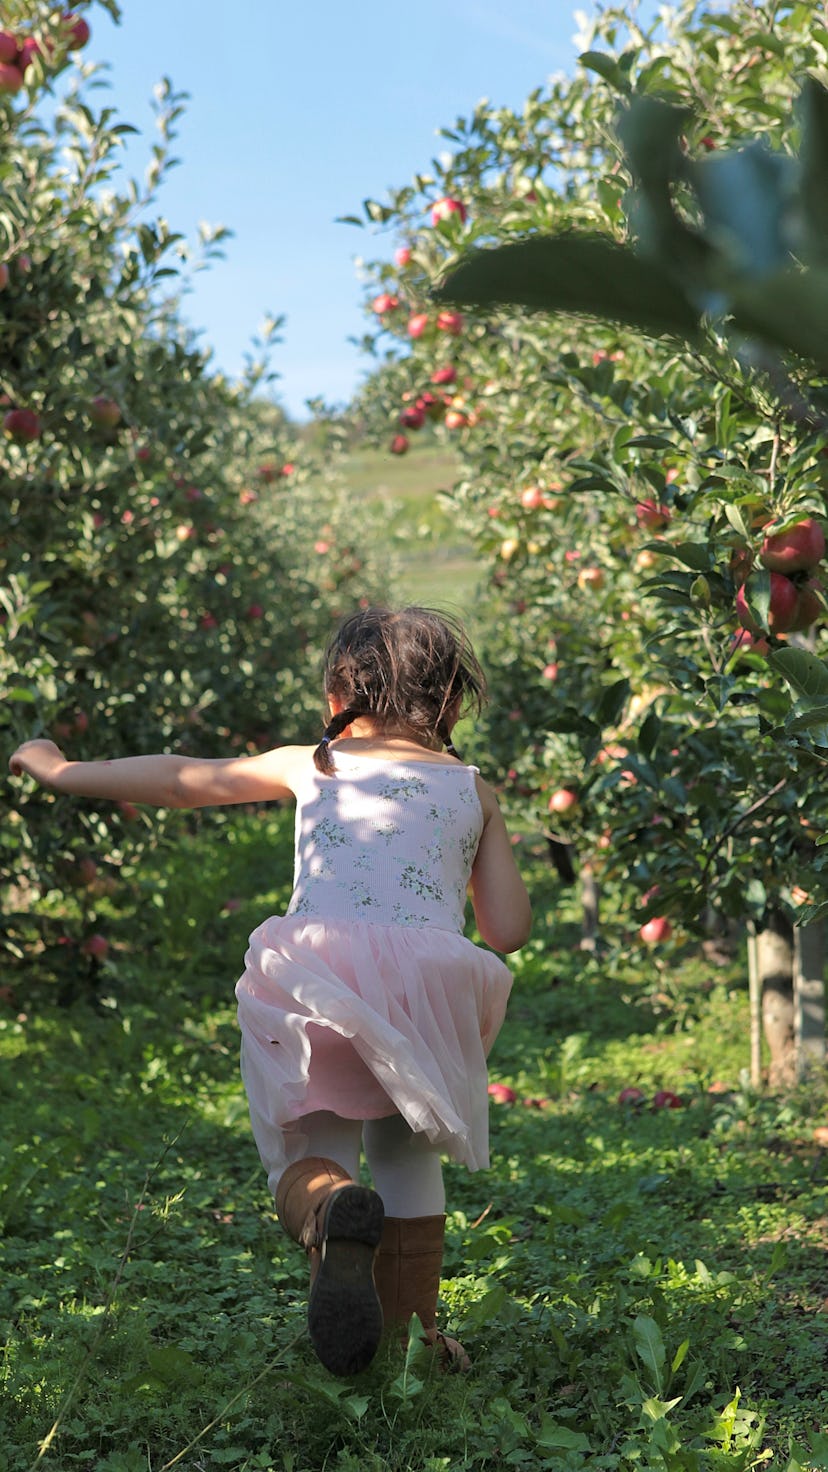 Cheerful little girl running freely at the apple orchard, enjoying nice sunny afternoon outdoors.